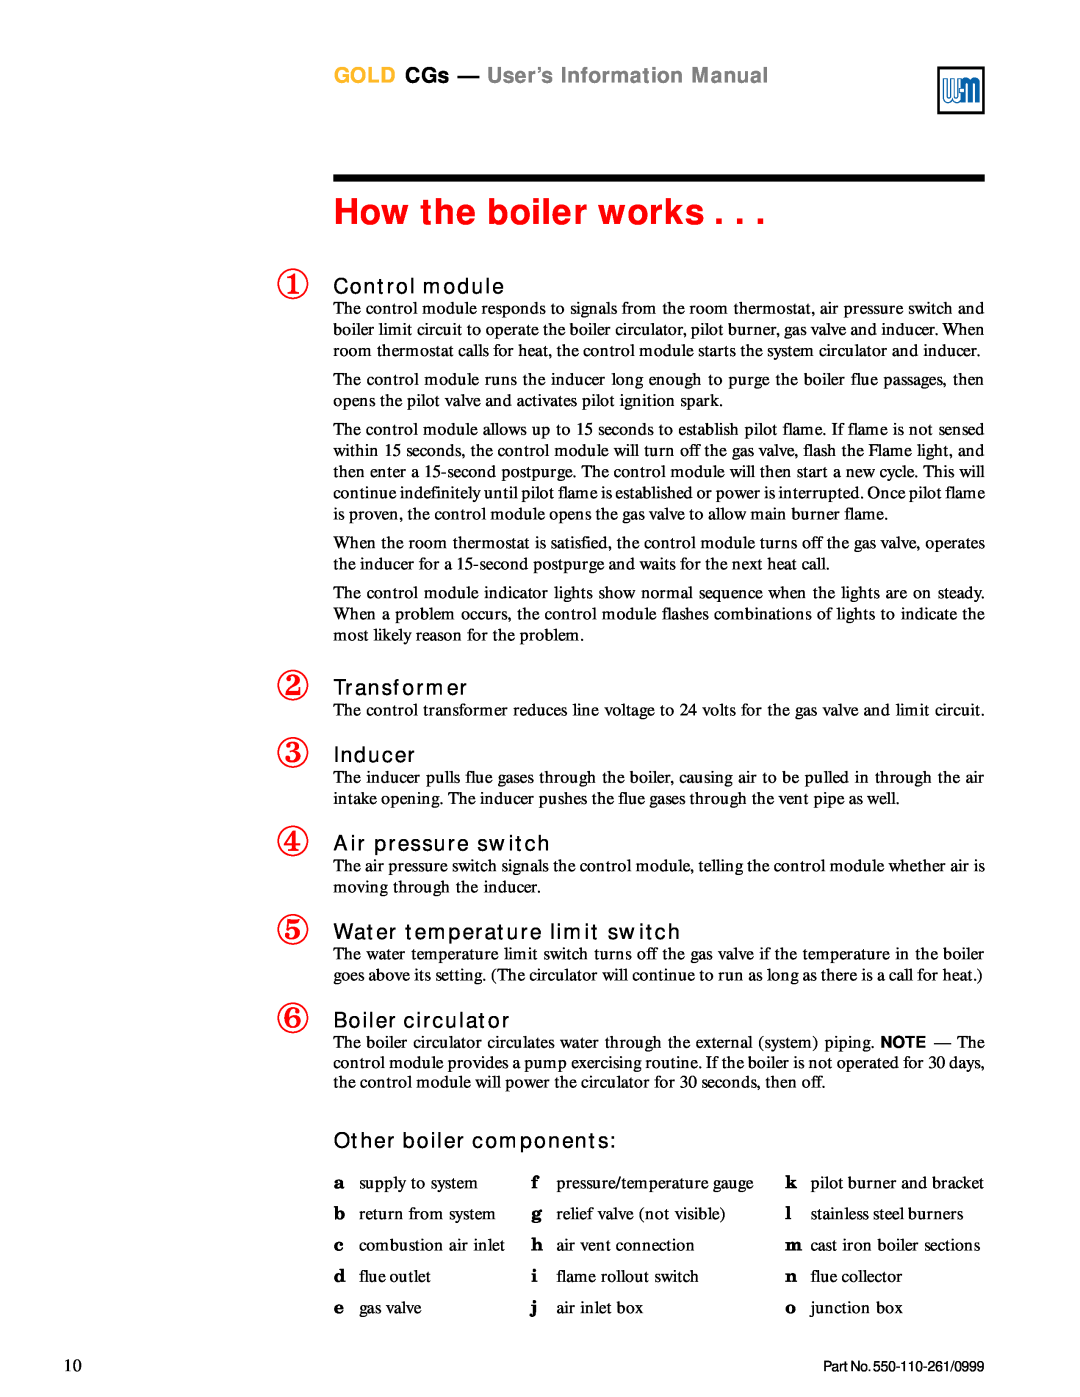 Weil-McLain manual How the boiler works, GOLD CGs - User’s Information Manual, ①Control module, Transformer, Inducer 